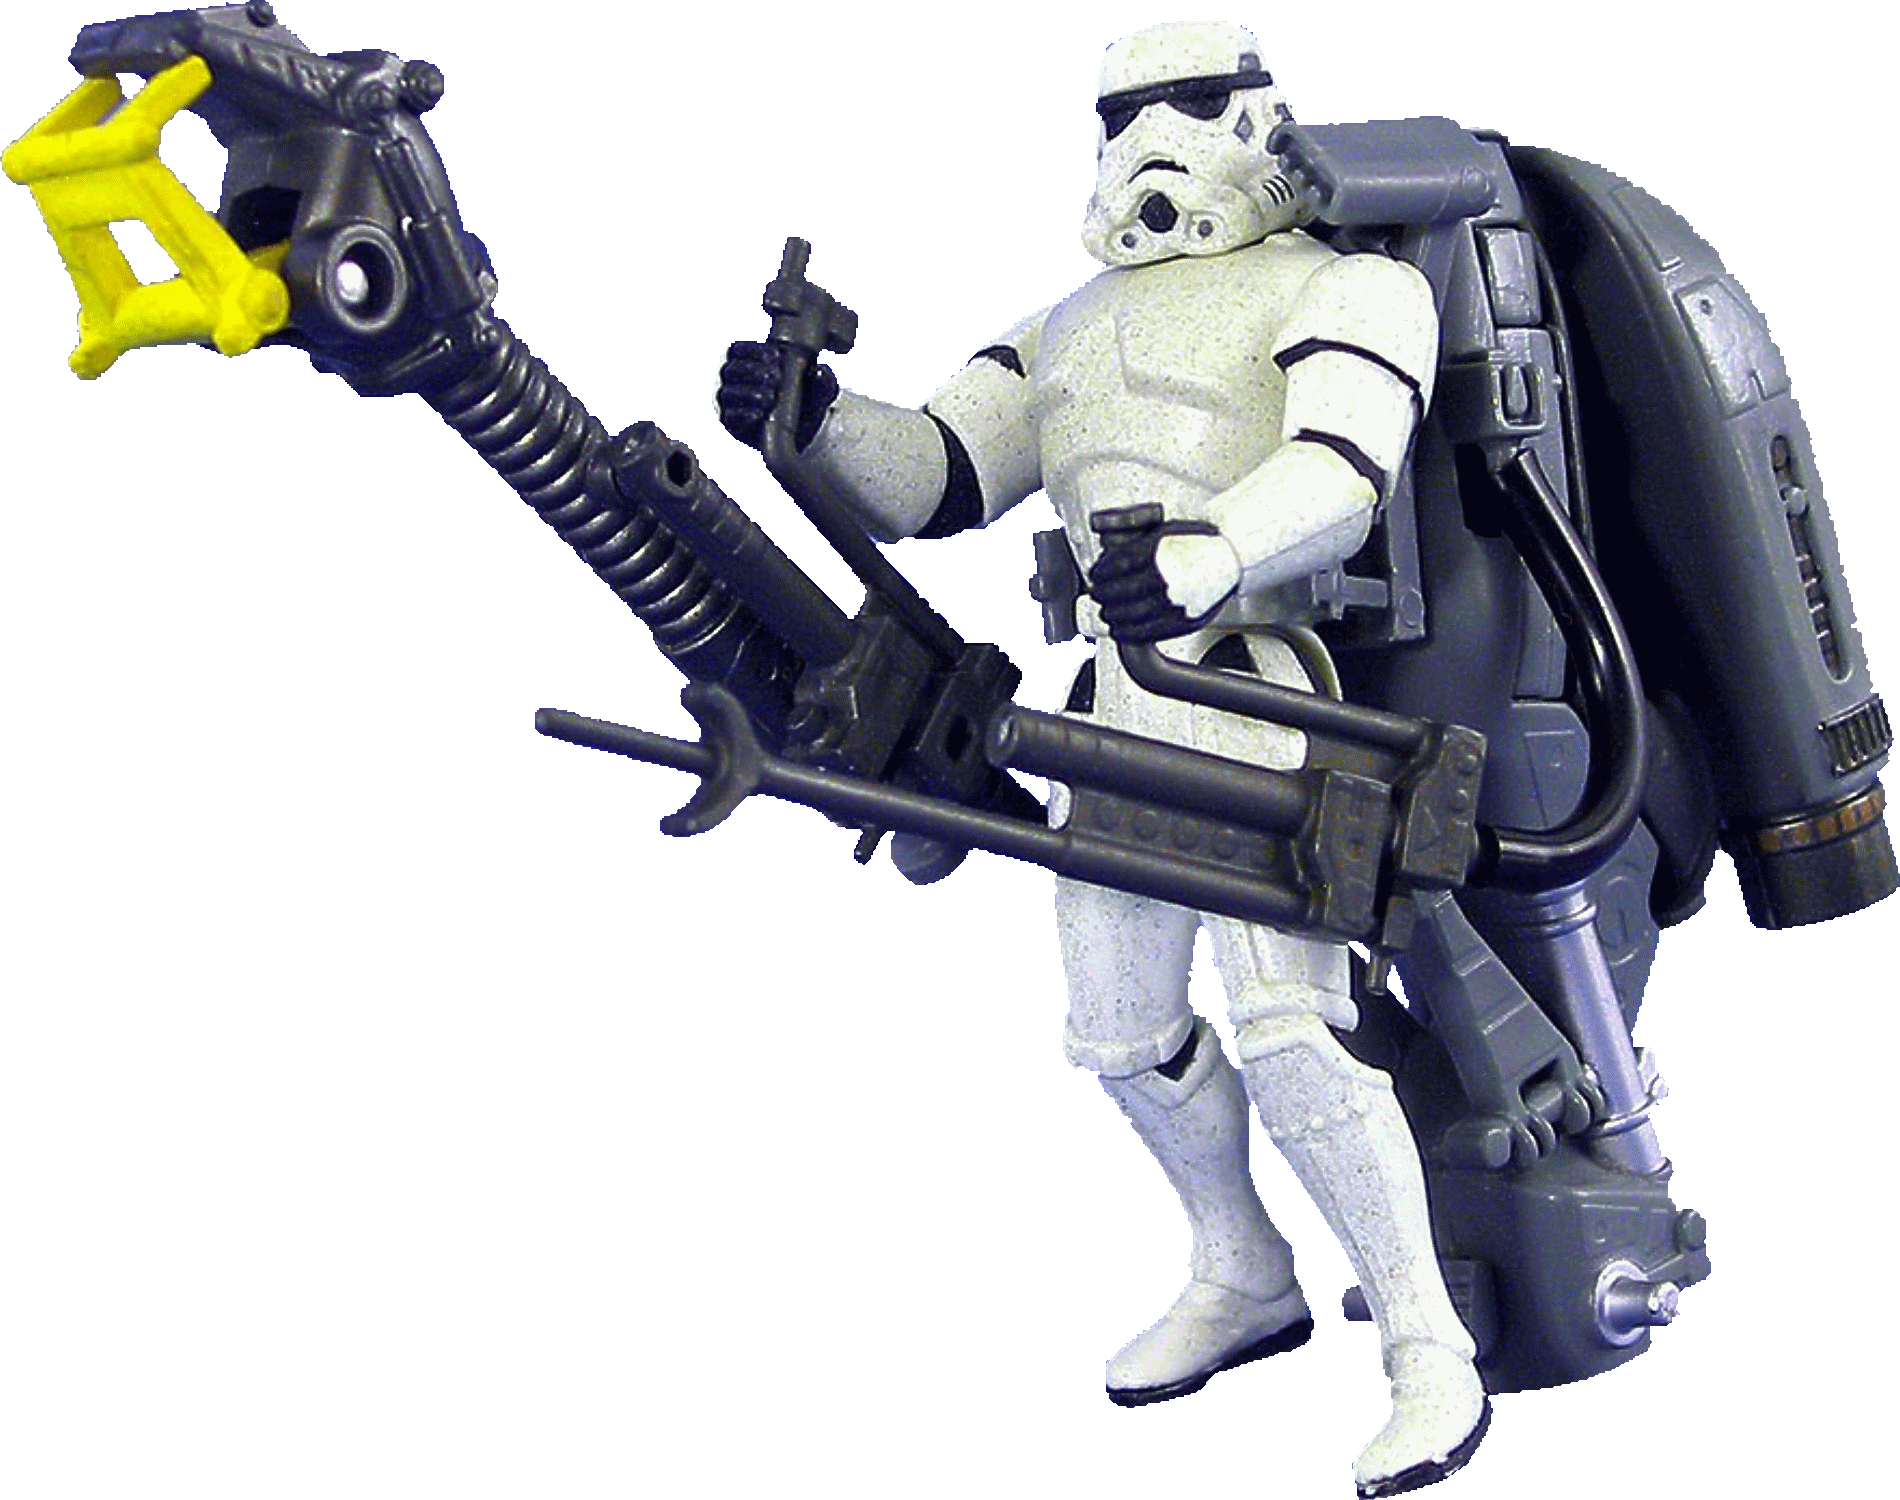 Galactic Empire 69609 1996 Details about   Star Wars Deluxe Crowd Control Stormtrooper MIB! 